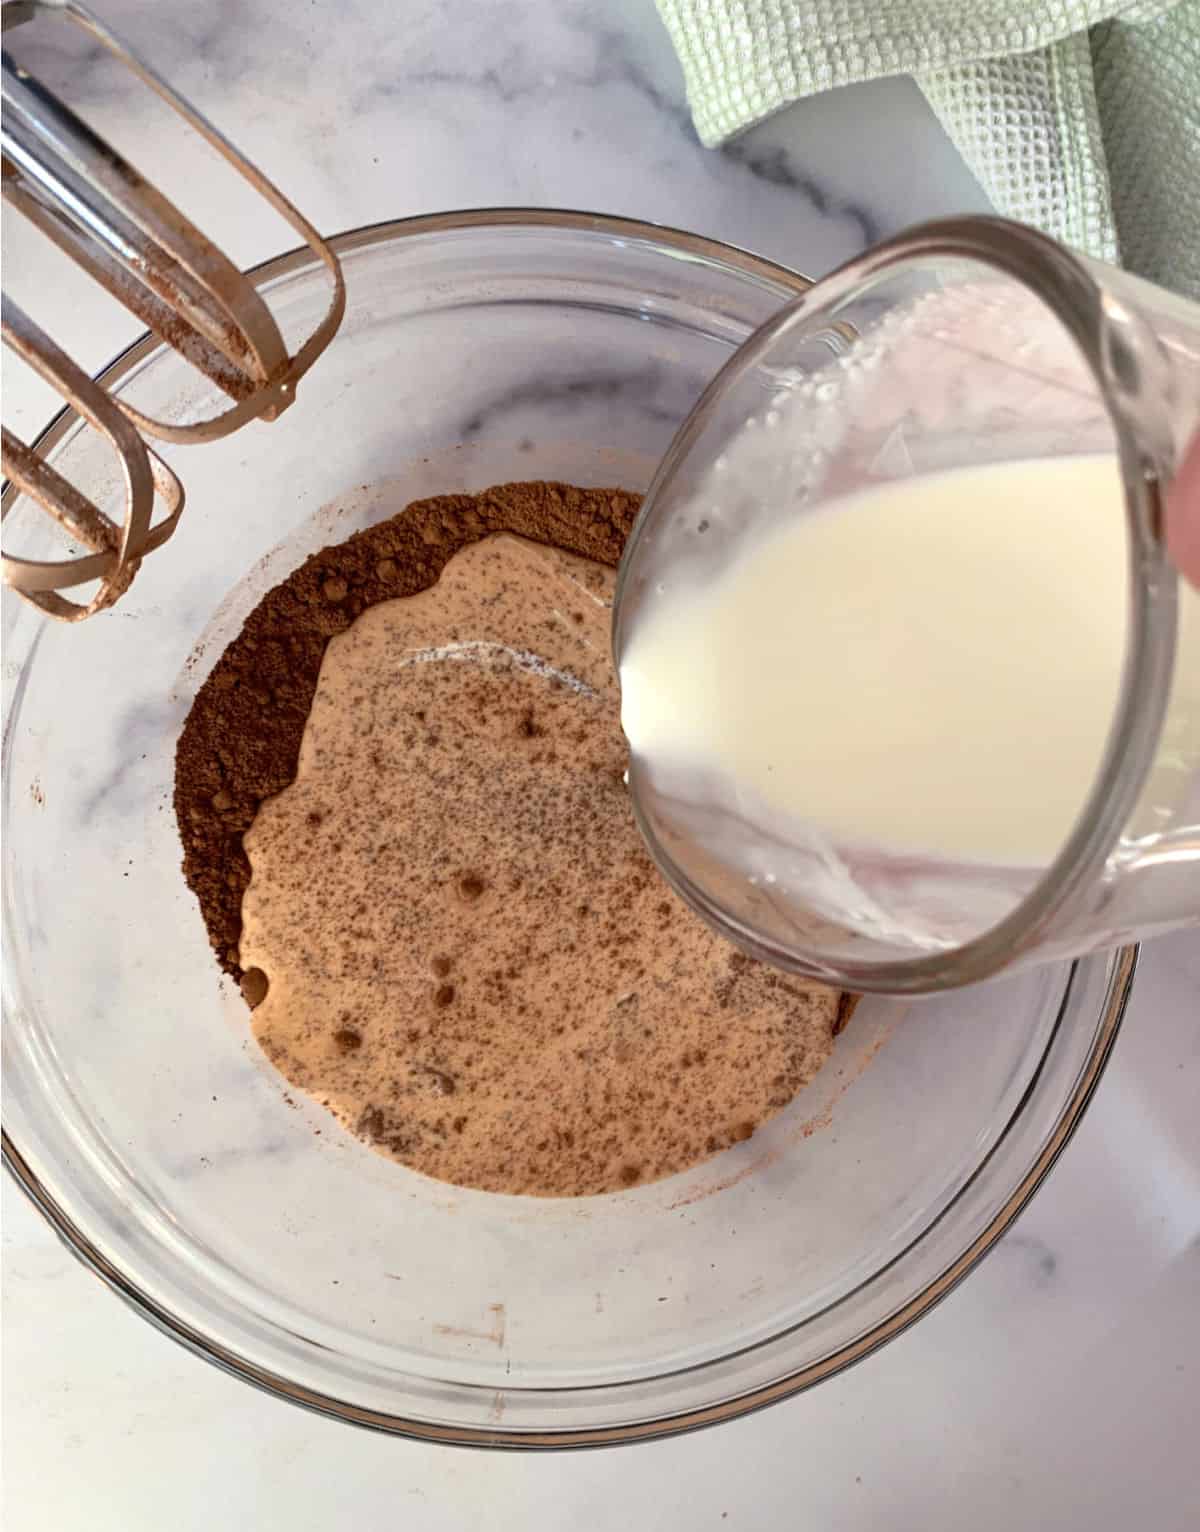 Adding cream to cocoa powder in a glass mixing bowl.